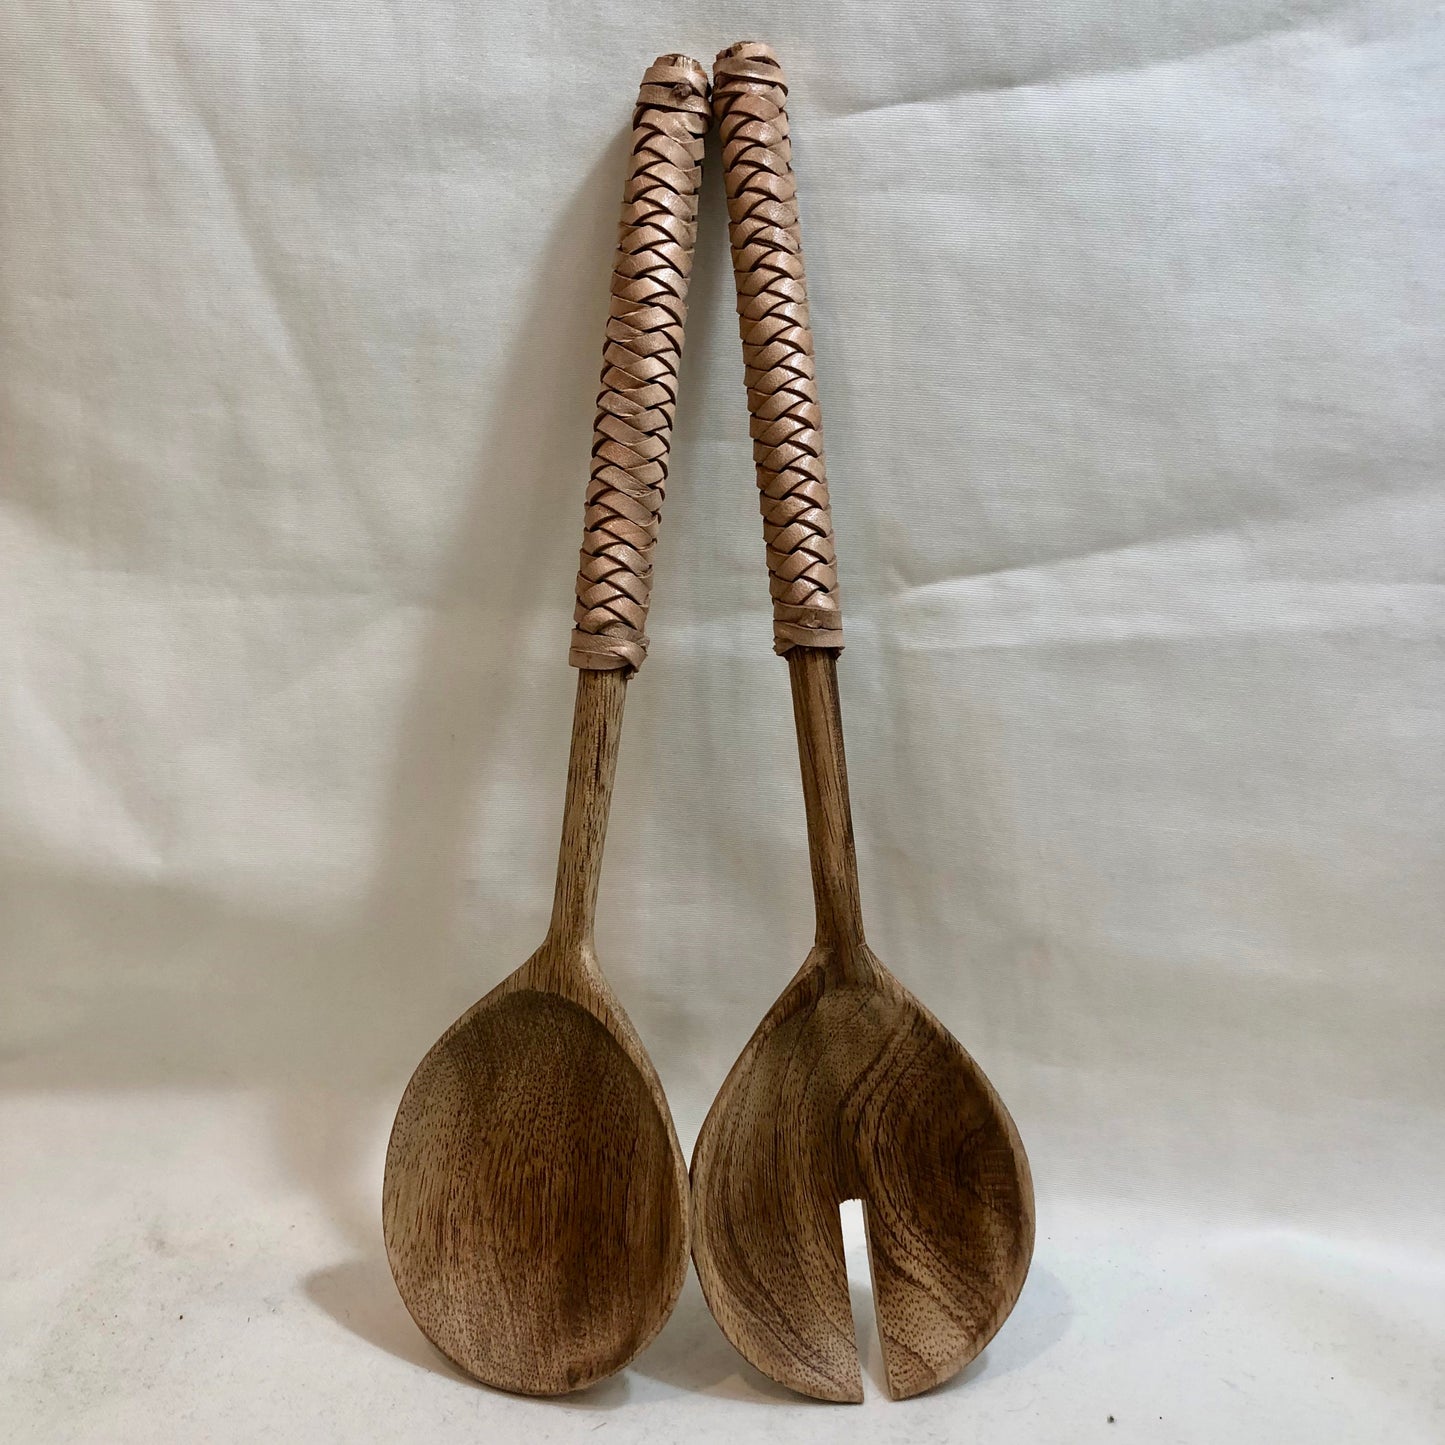 Salad Servers Wood w/Leather Wrapped Handles